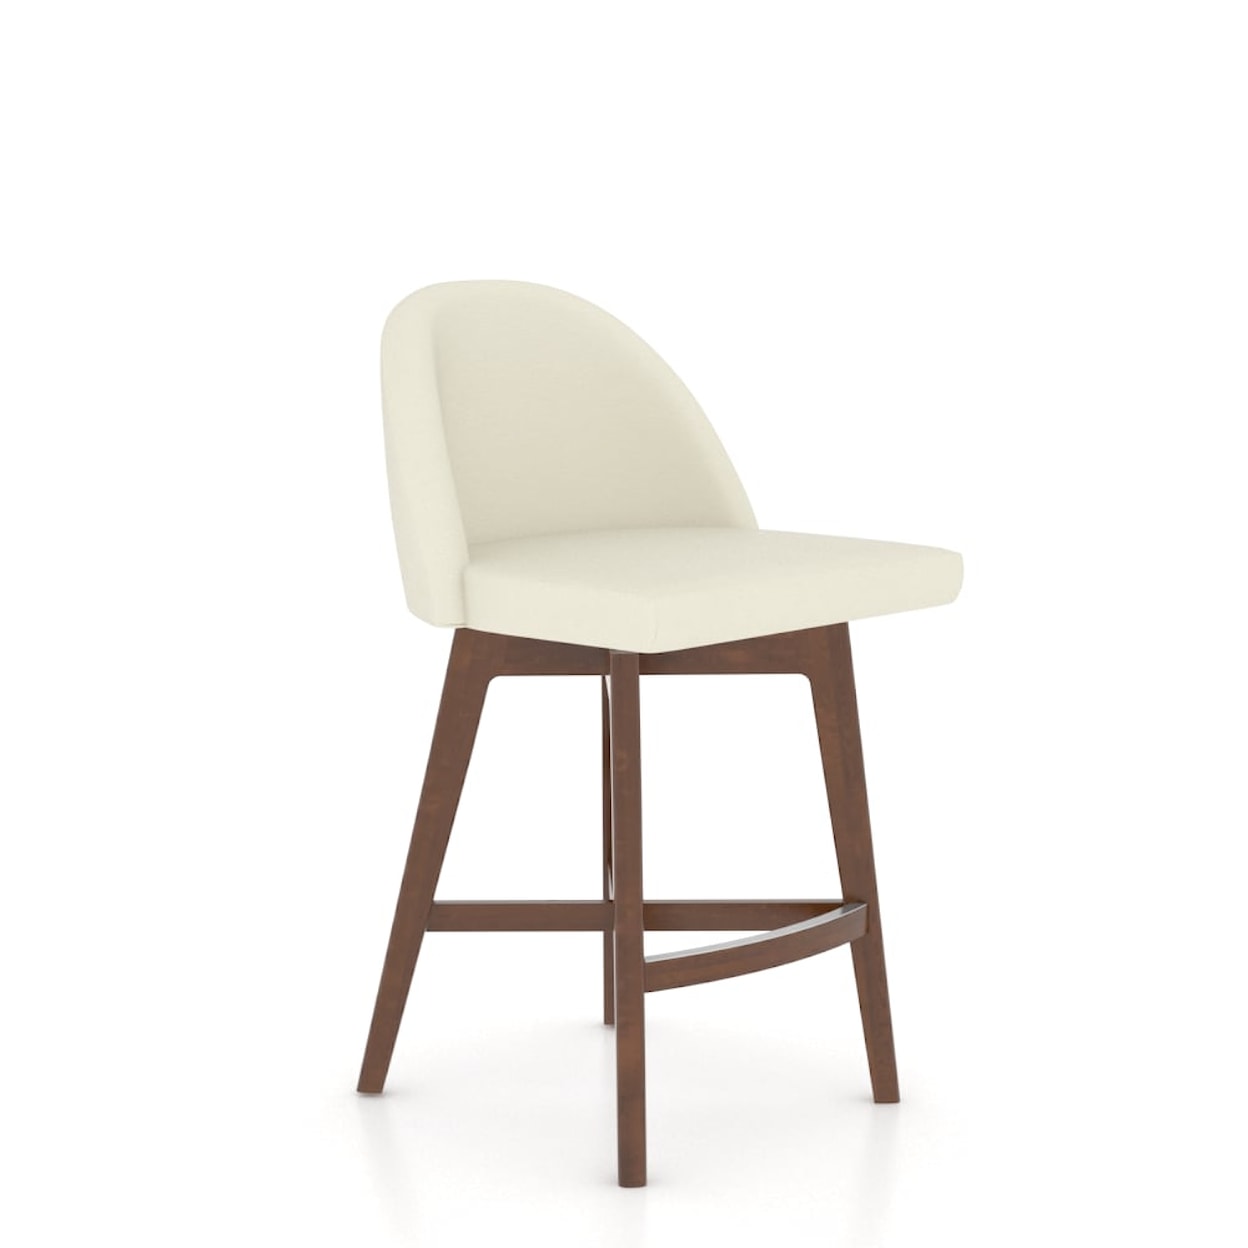 Canadel Downtown Upholstered 24" Swivel Stool